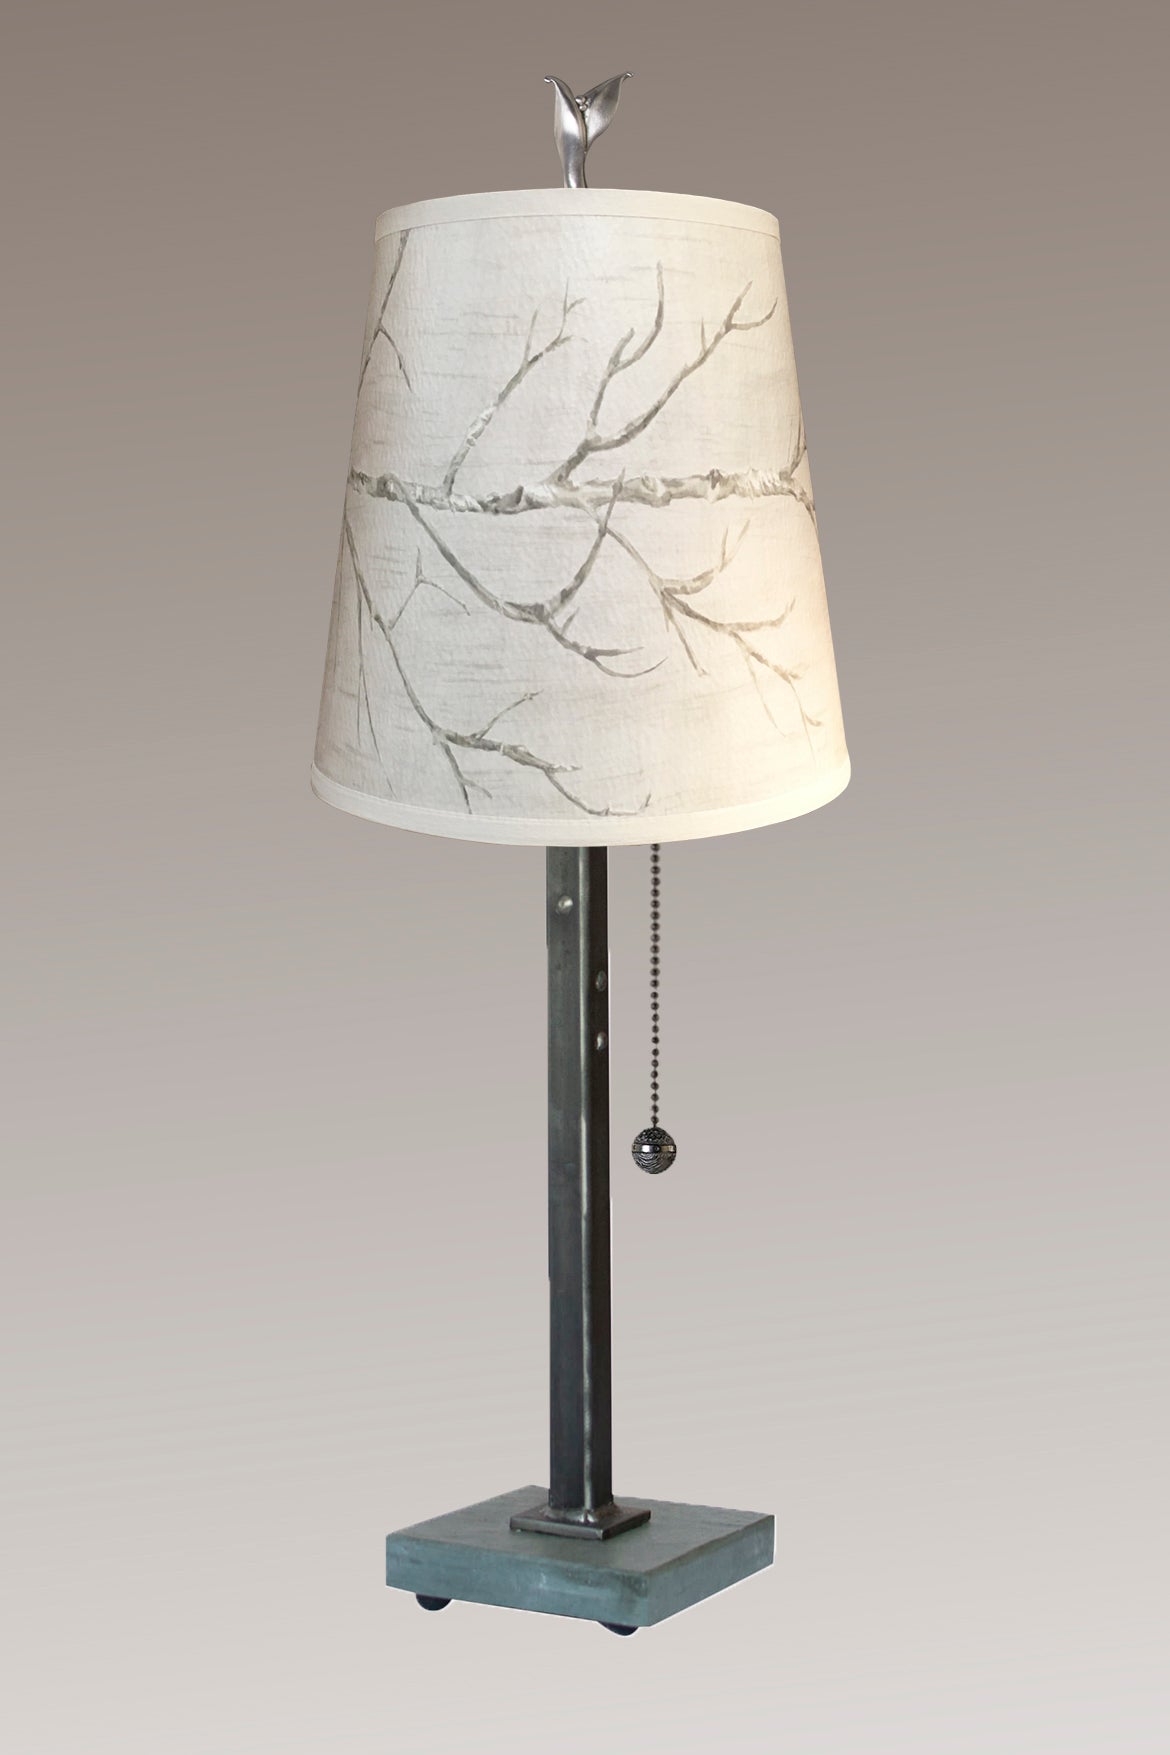 Steel Table Lamp with Small Drum Shade in Sweeping Branch